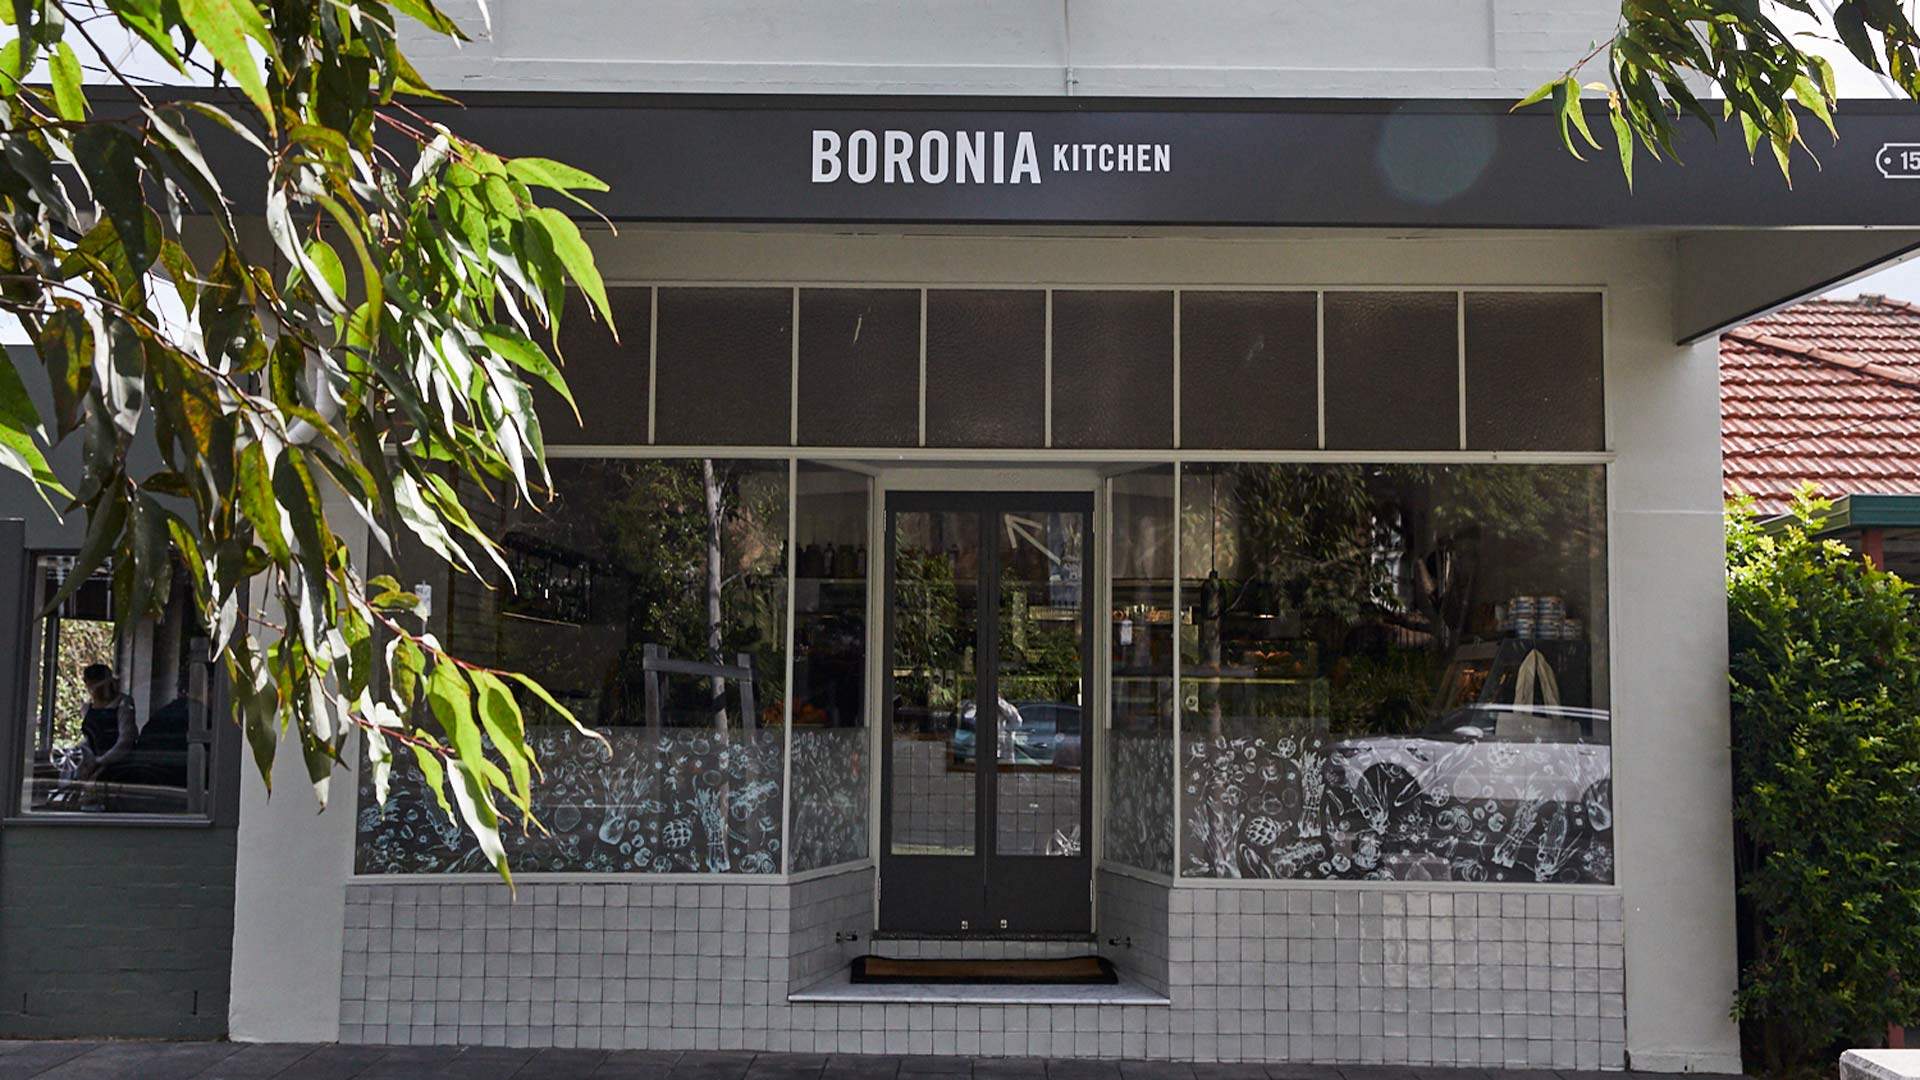 Sydney's Northwest Suburbs Have a New All-Day Eatery From a Former ARIA Chef